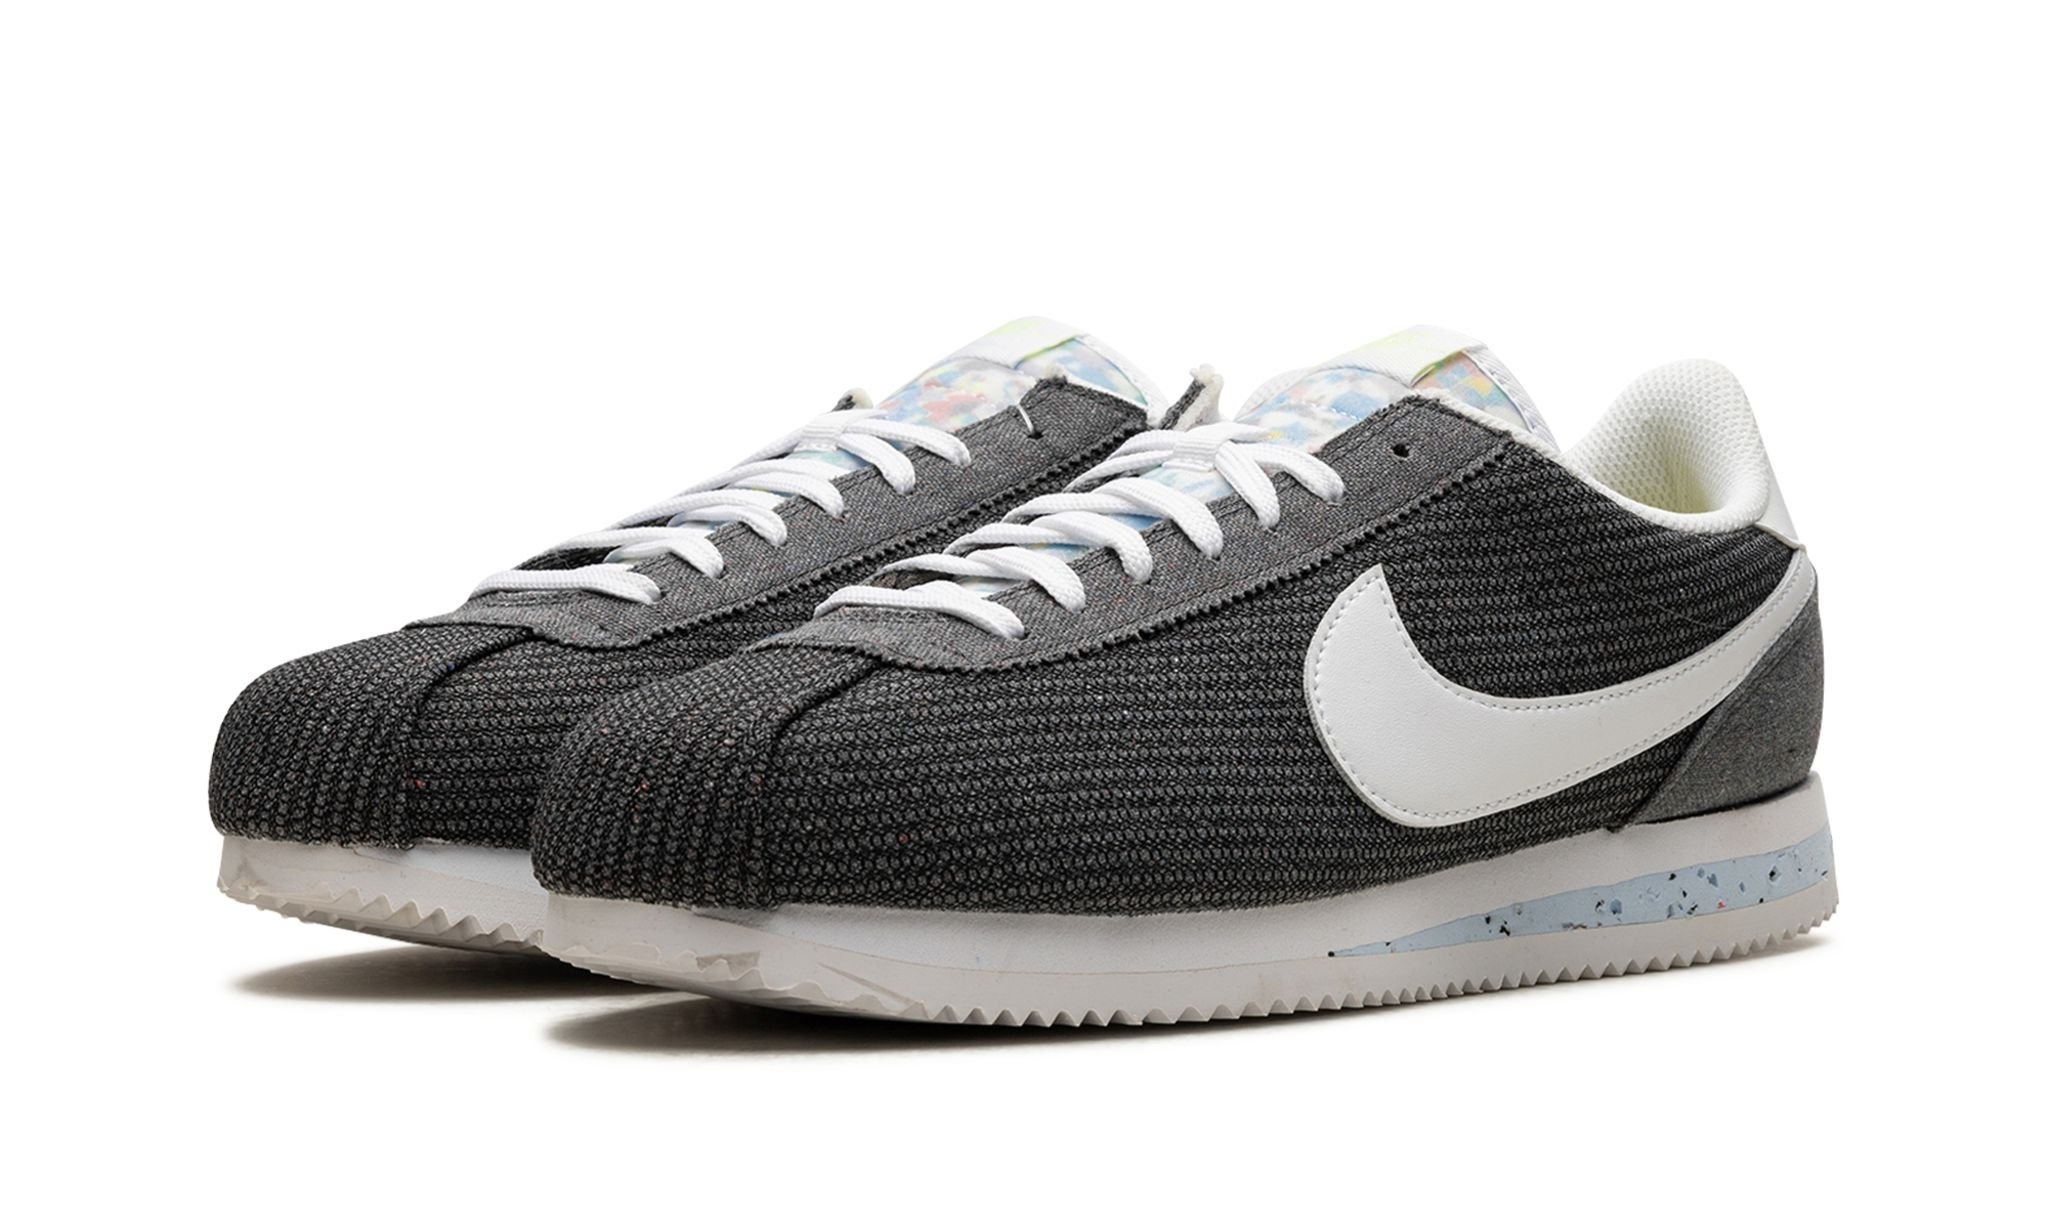 Classic Cortez "Recycled Canvas" - 2